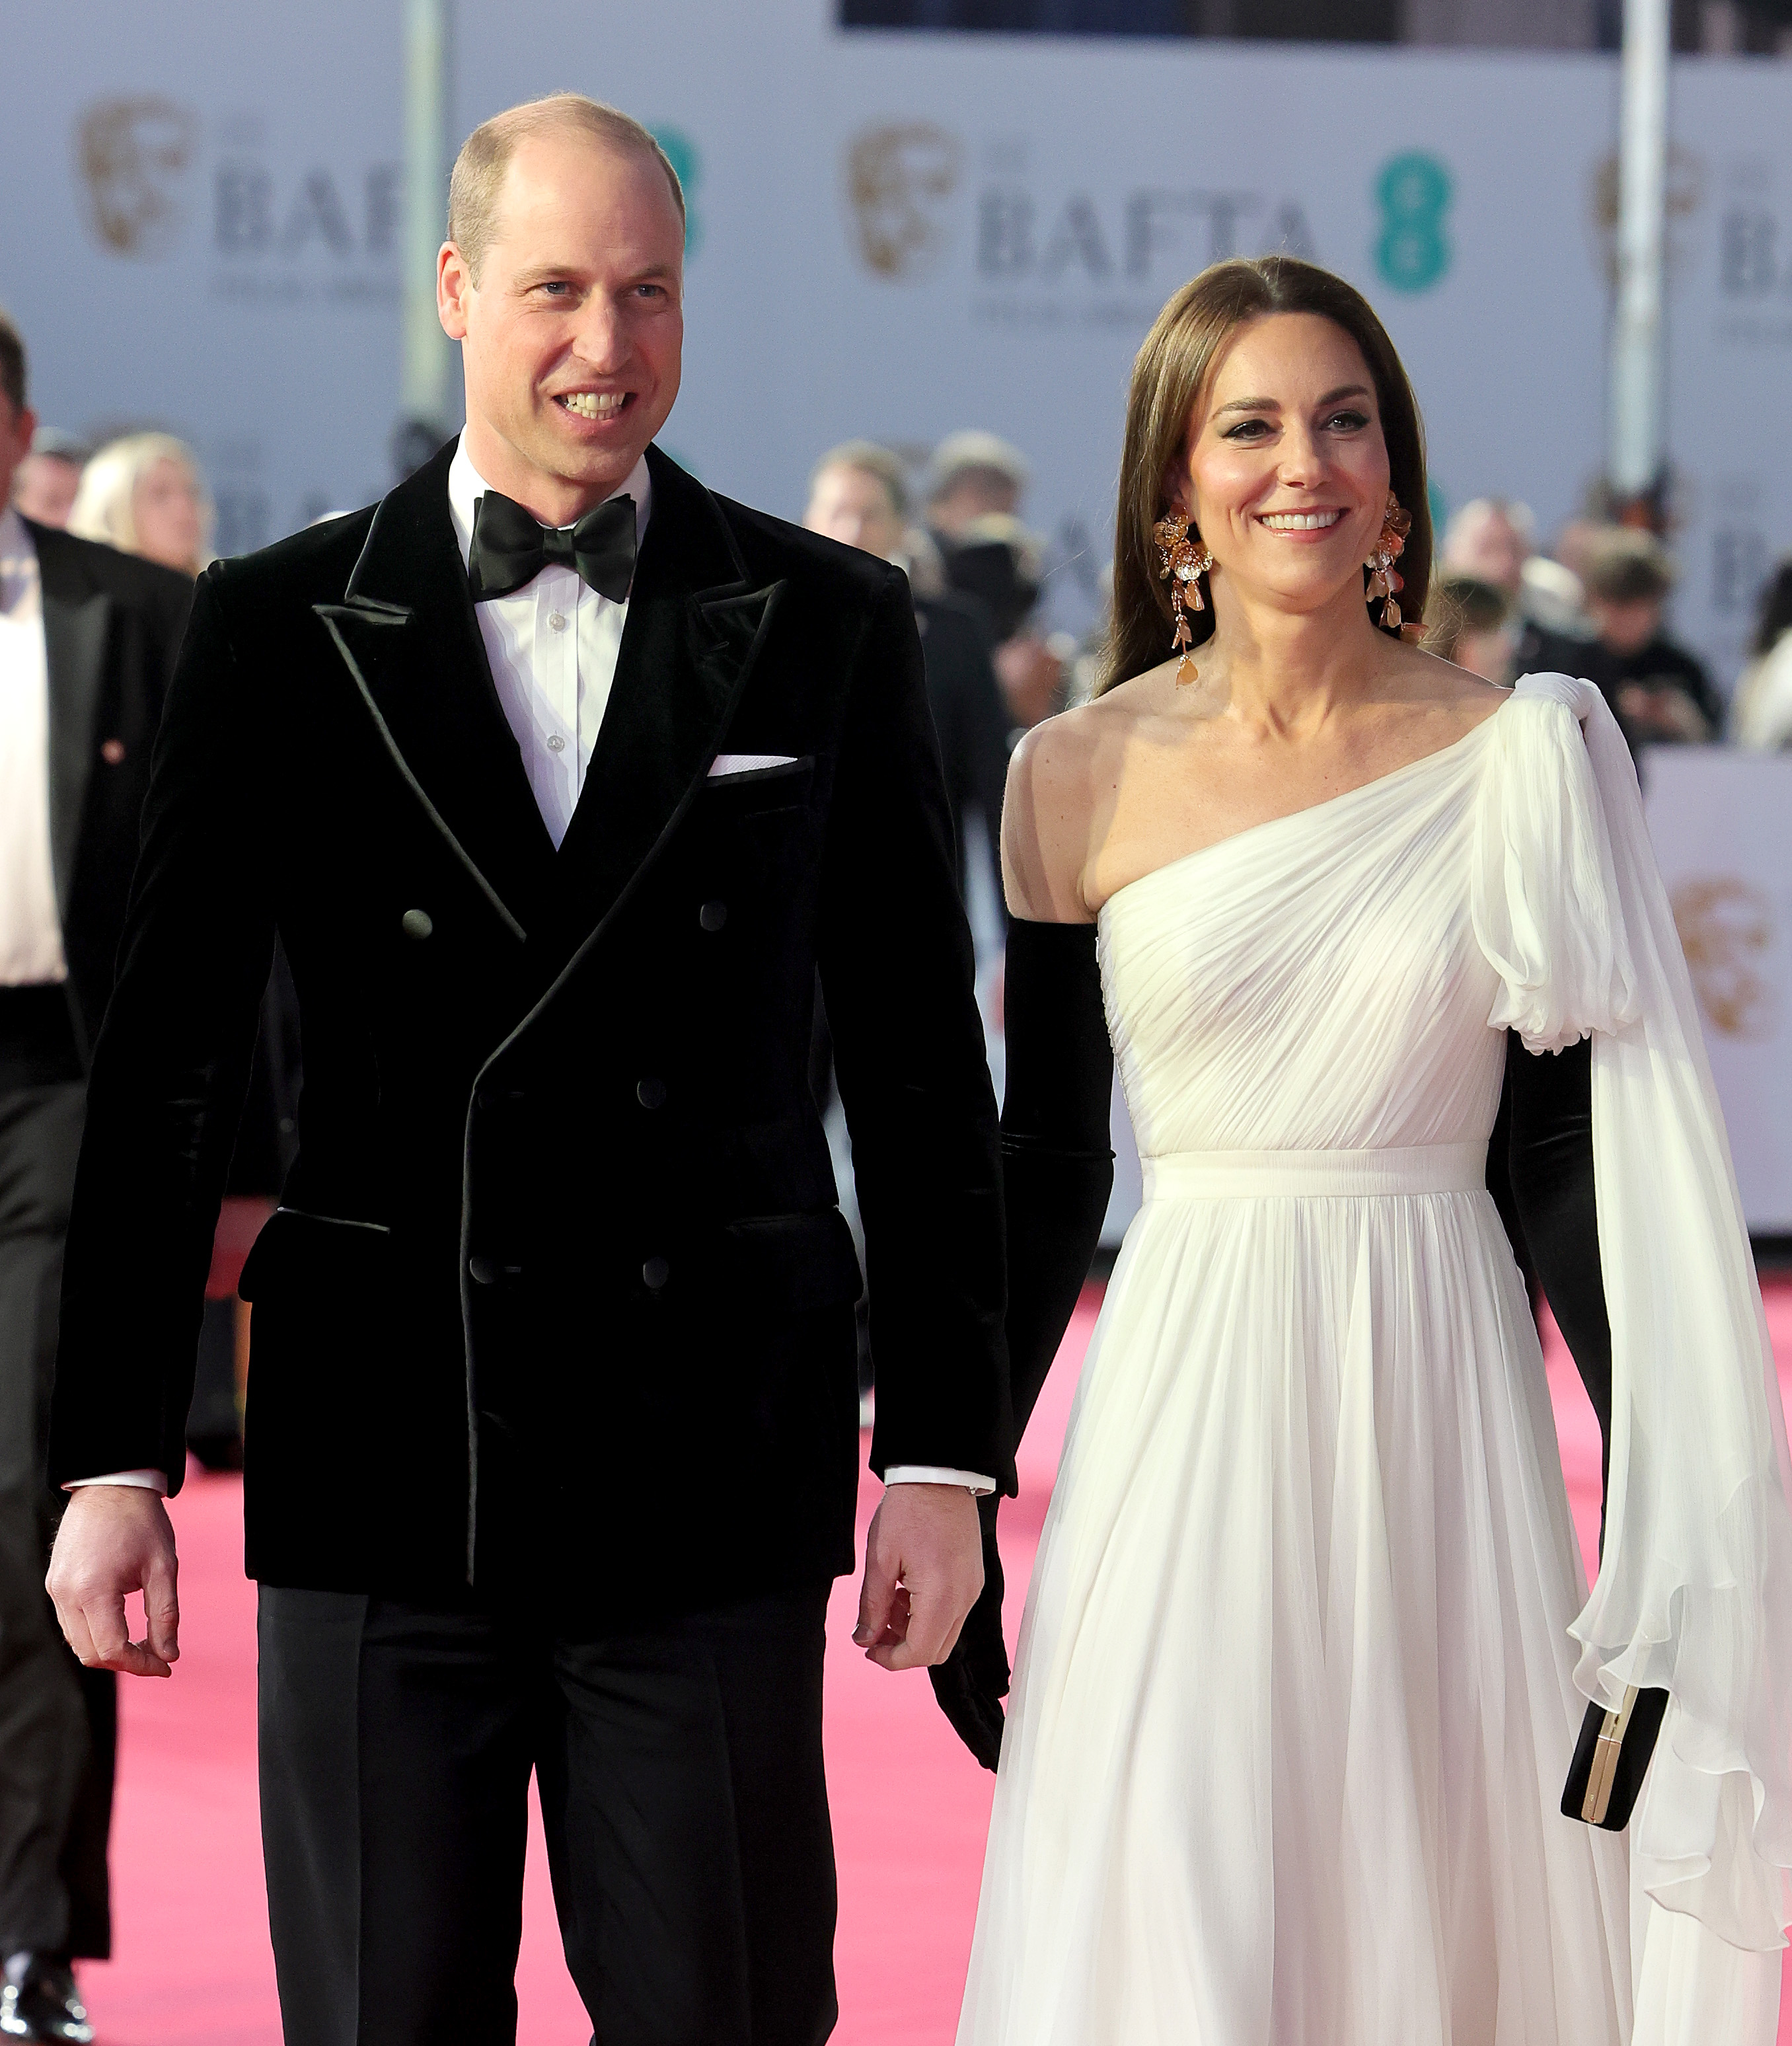 Prince William and Kate Middleton at the EE BAFTA Film Awards in London, England on February 19, 2023 | Source: Getty Images